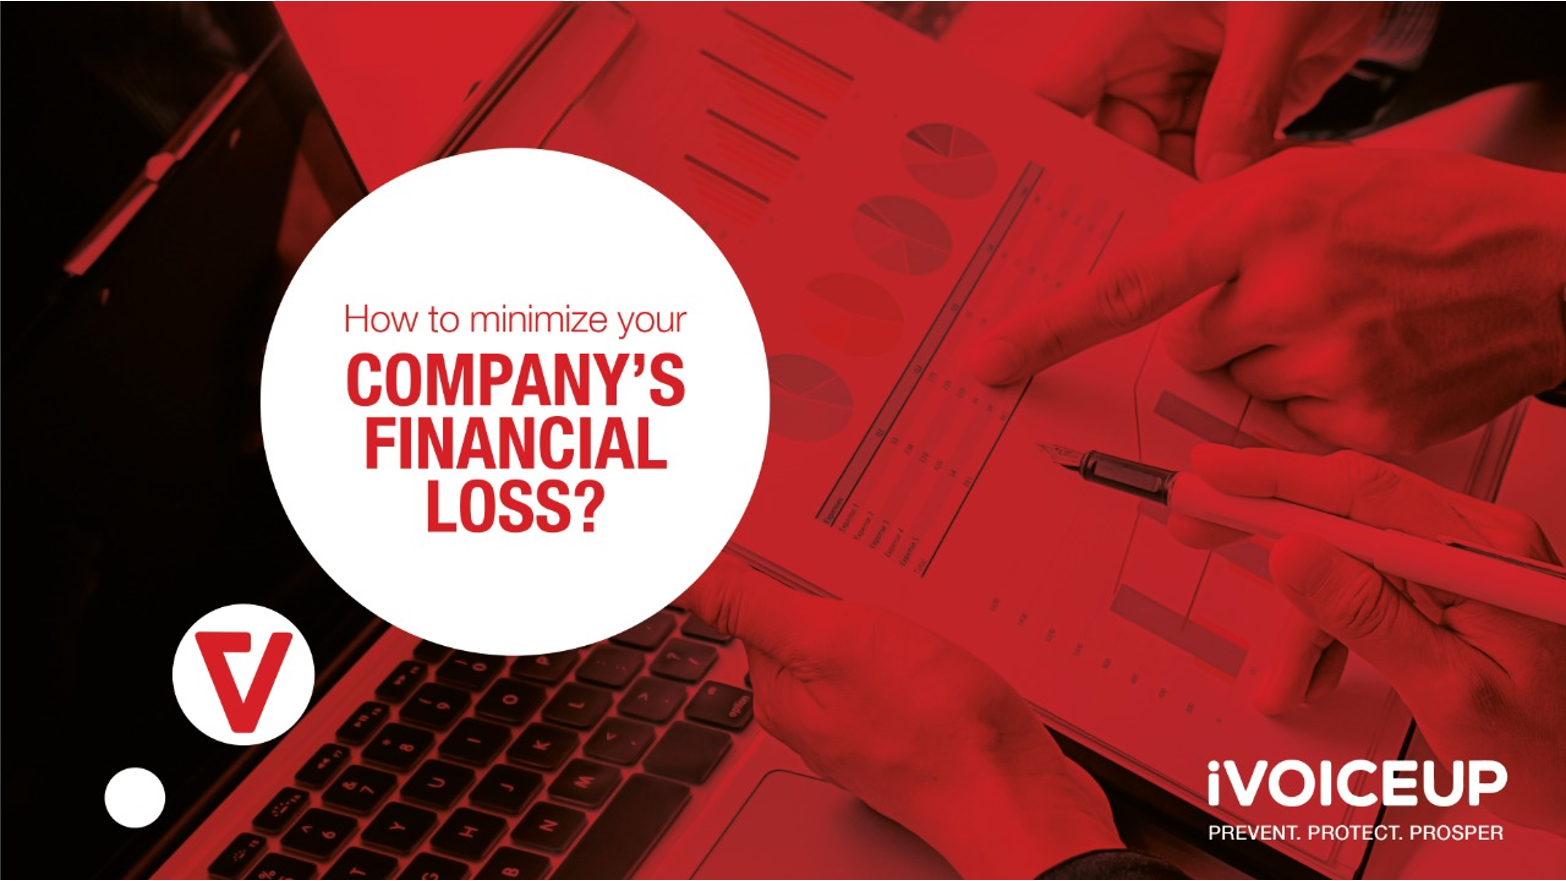 How to minimize your company’s financial loss?